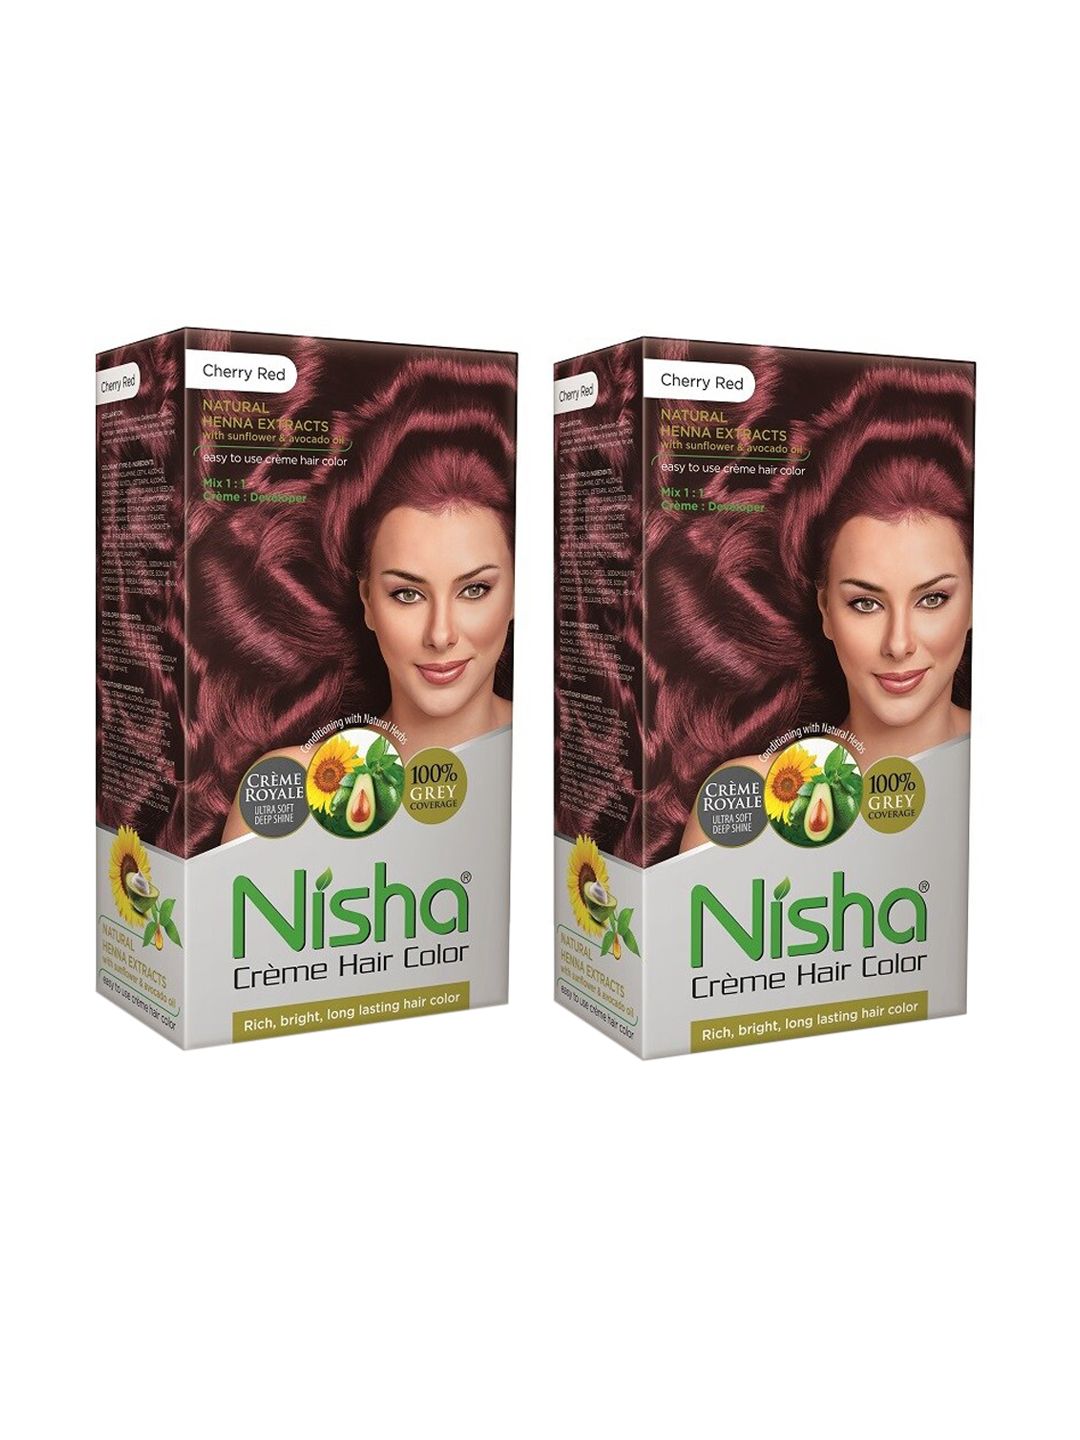 Nisha Unisex Red Pack of 2 Creme Hair Color 120gm each- Cherry Red Price in India